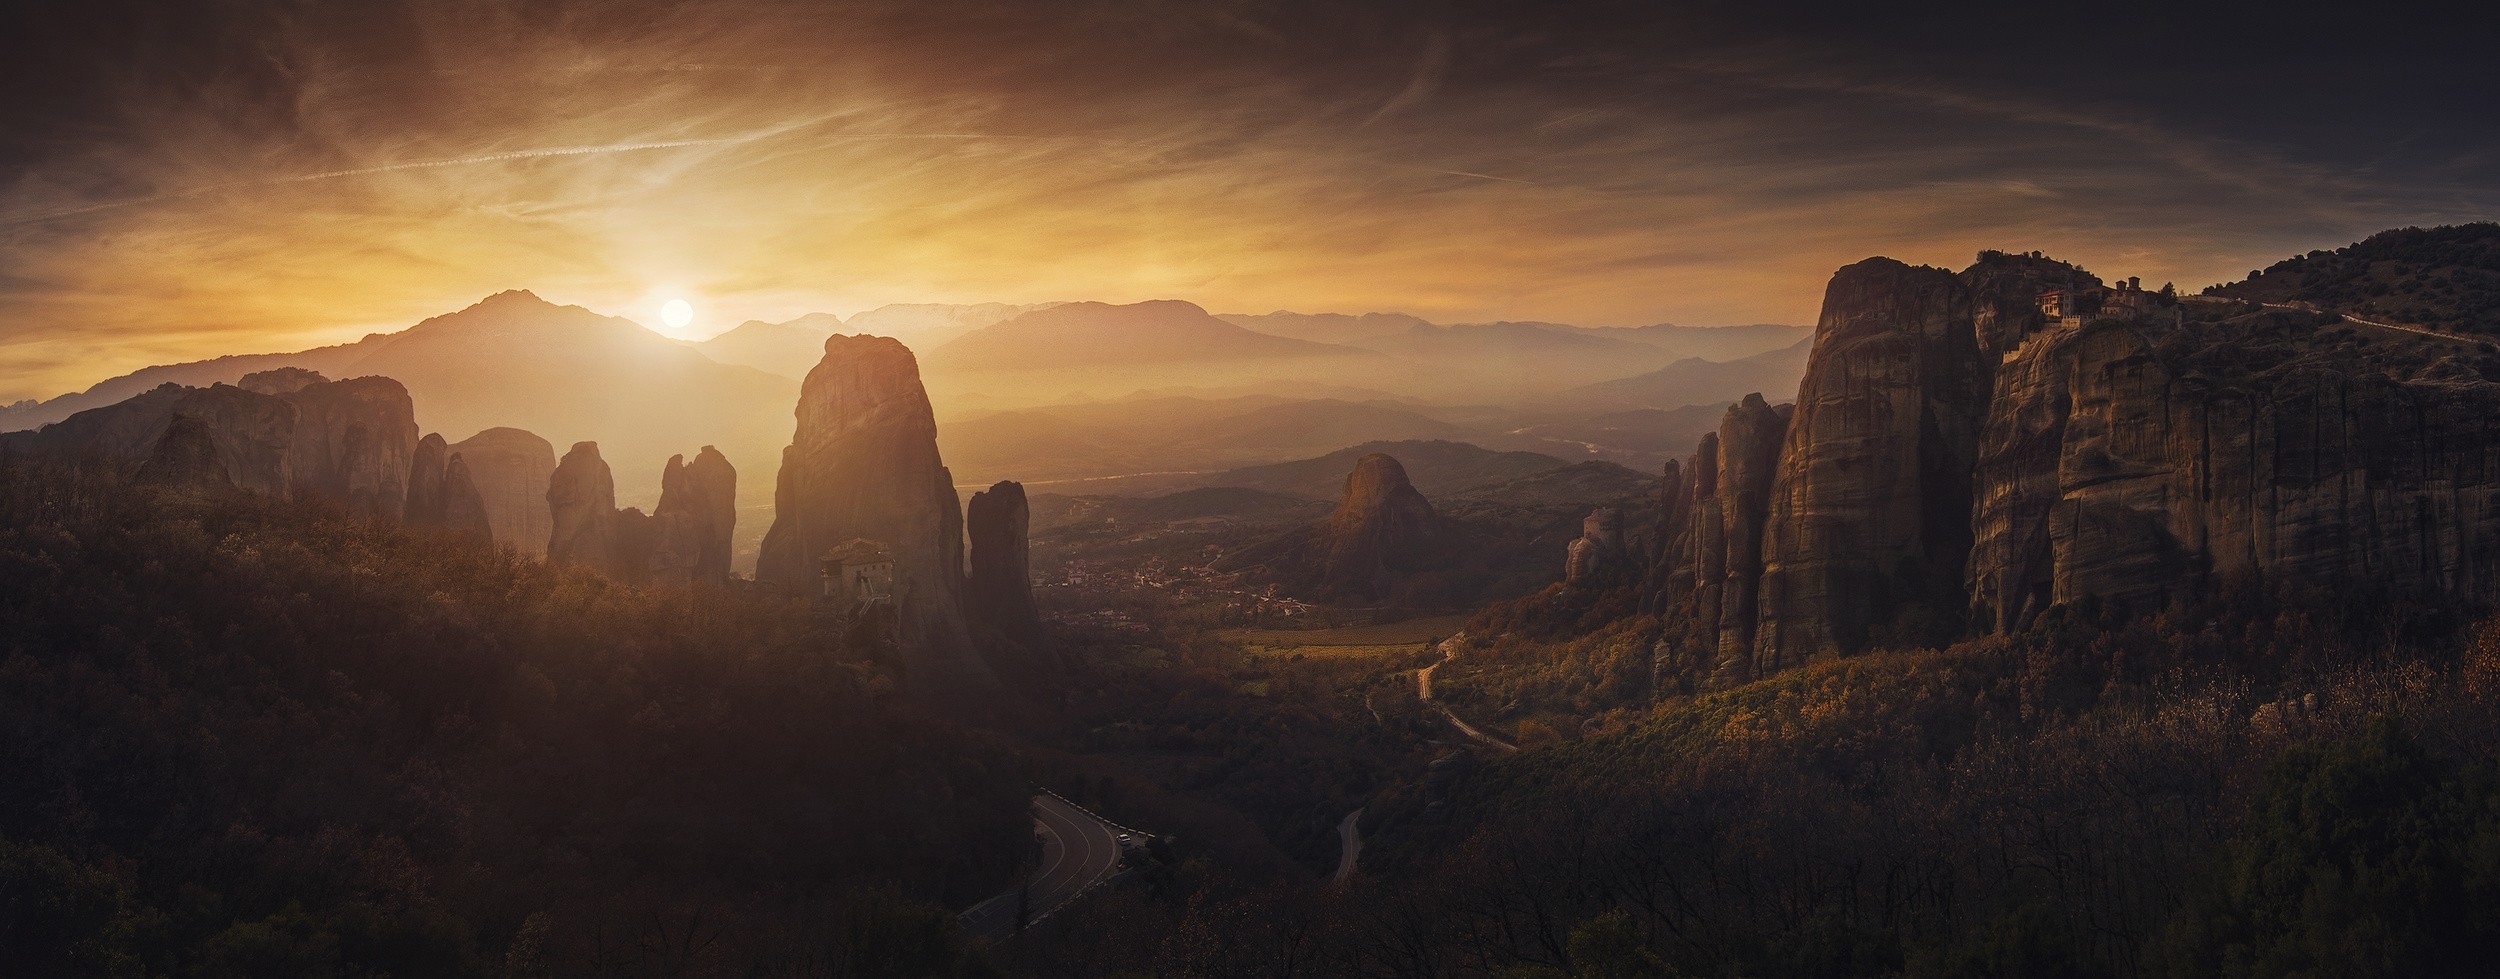 nature, Photography, Landscape, Panorama, Sunset, Monastery, Rocks, Mountains, Valley, Road, Sky, Mist, Meteora, Greece Wallpaper